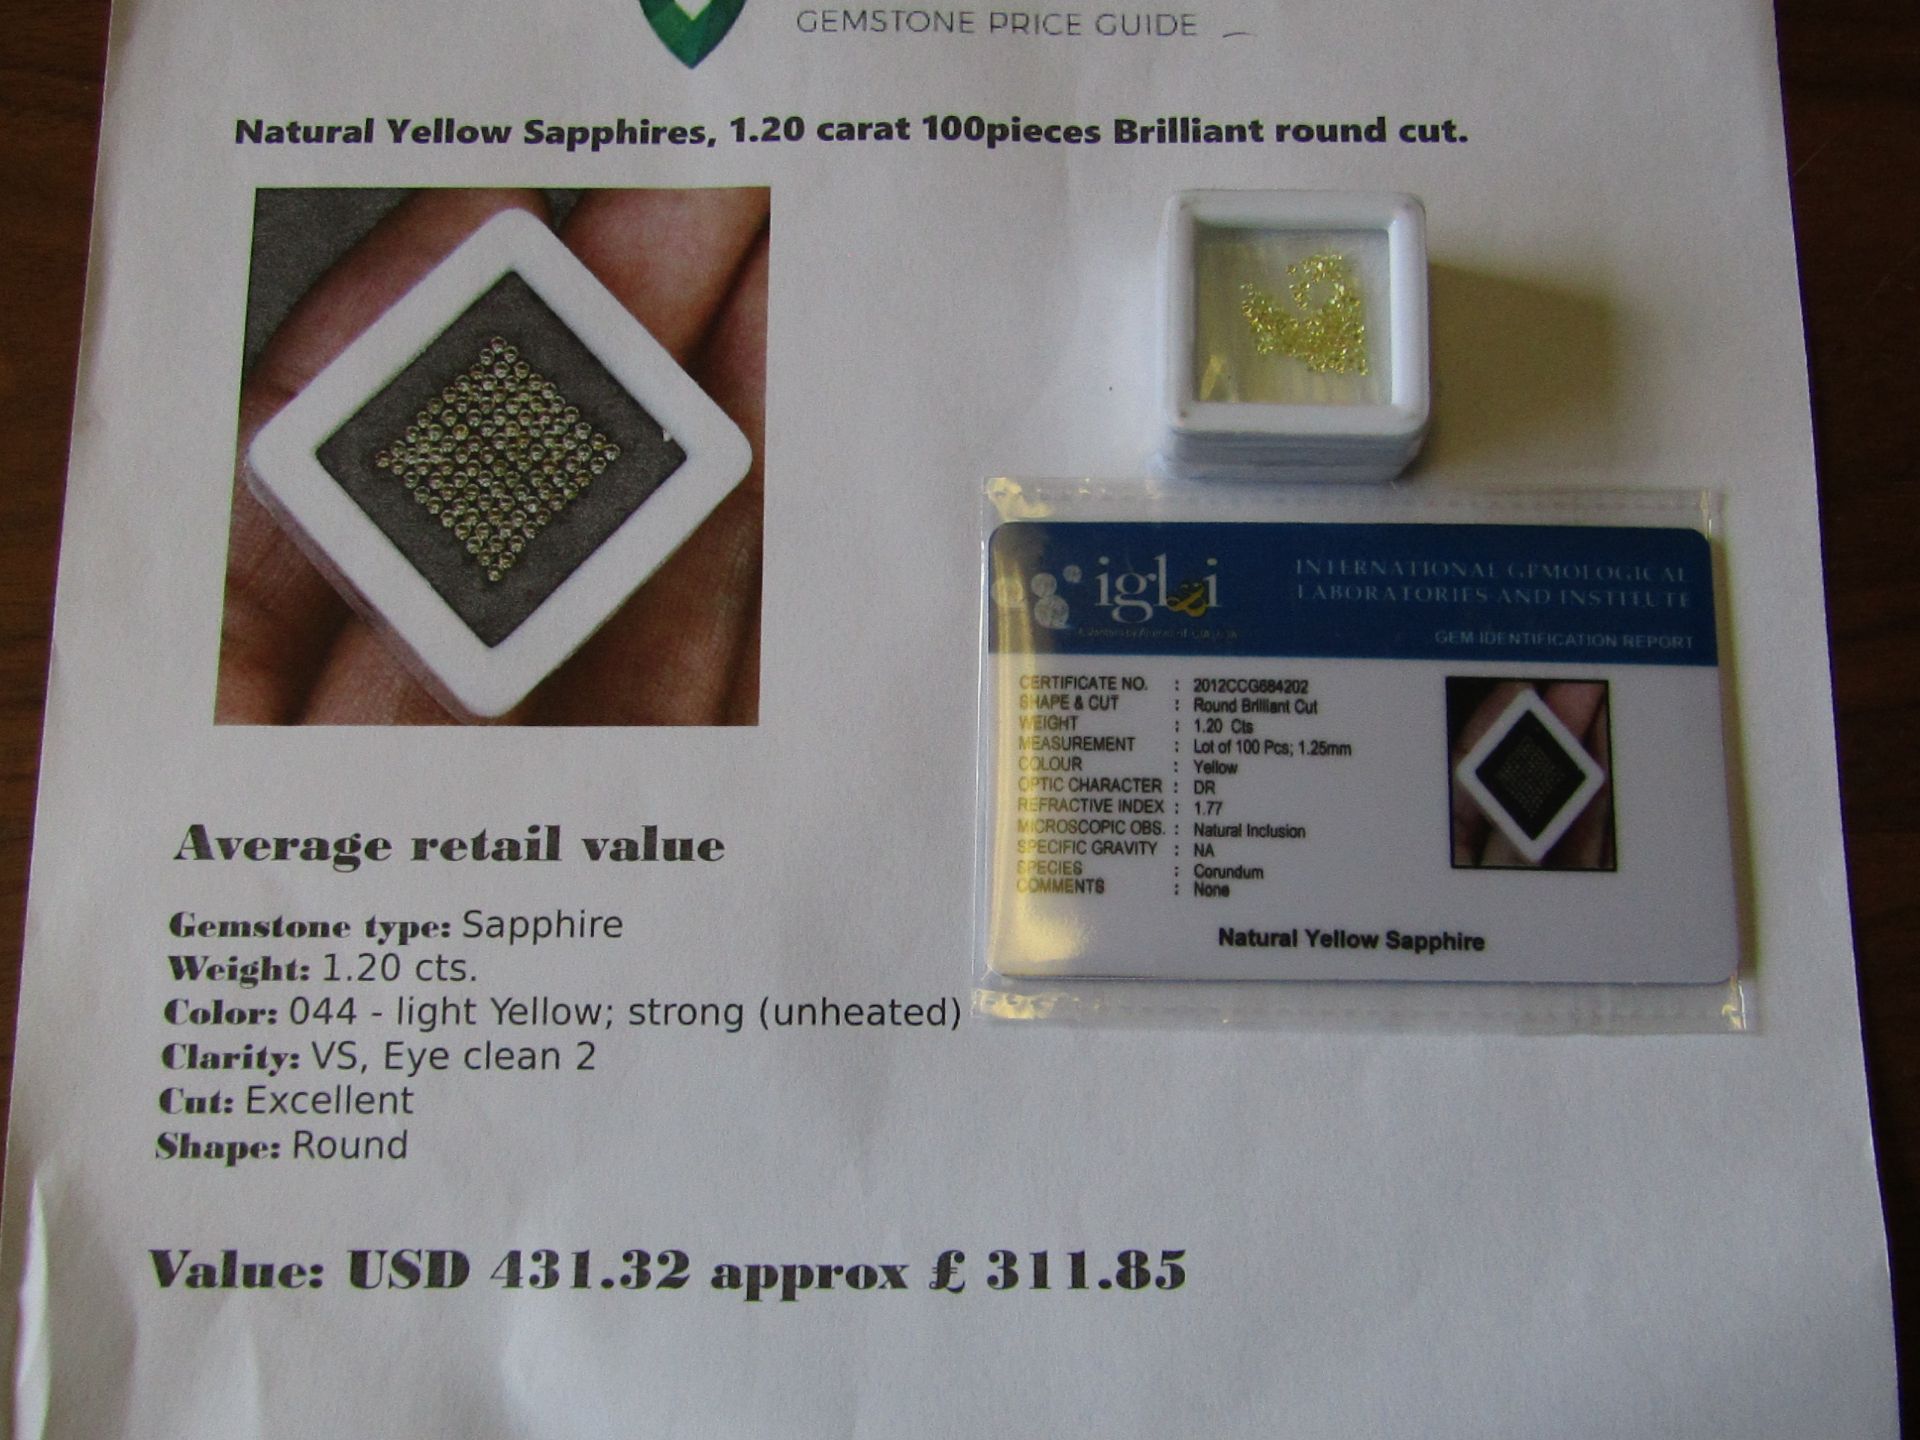 IGL&I certified - Natural Yellow Sapphires - 1.20 carats - 100 pieces - average retail value £311.85